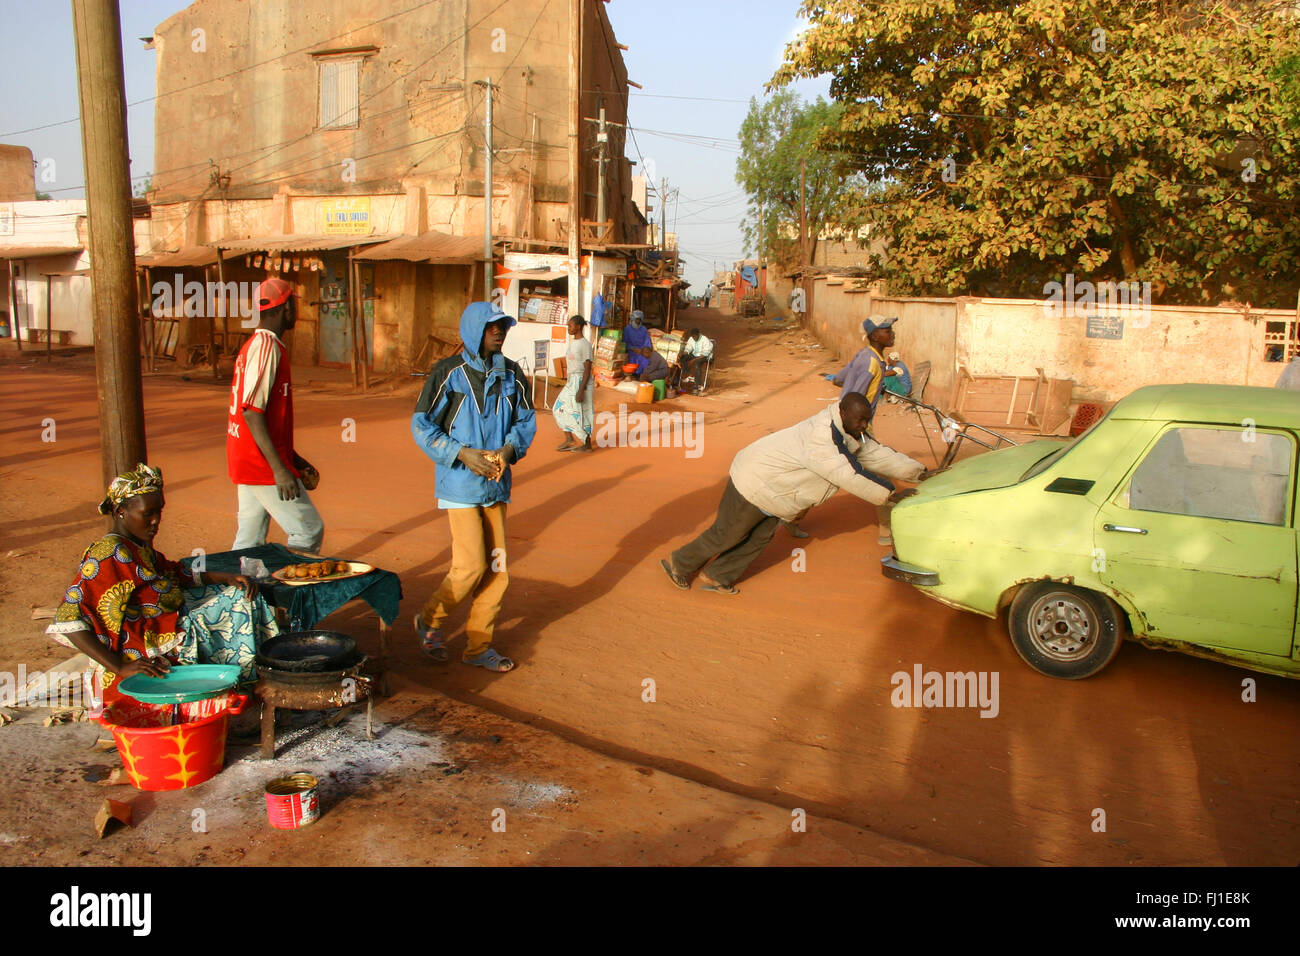 Street scene in Mopti , Mali - A man pushes a broken down car in the streets of Mopti in the early morning Stock Photo